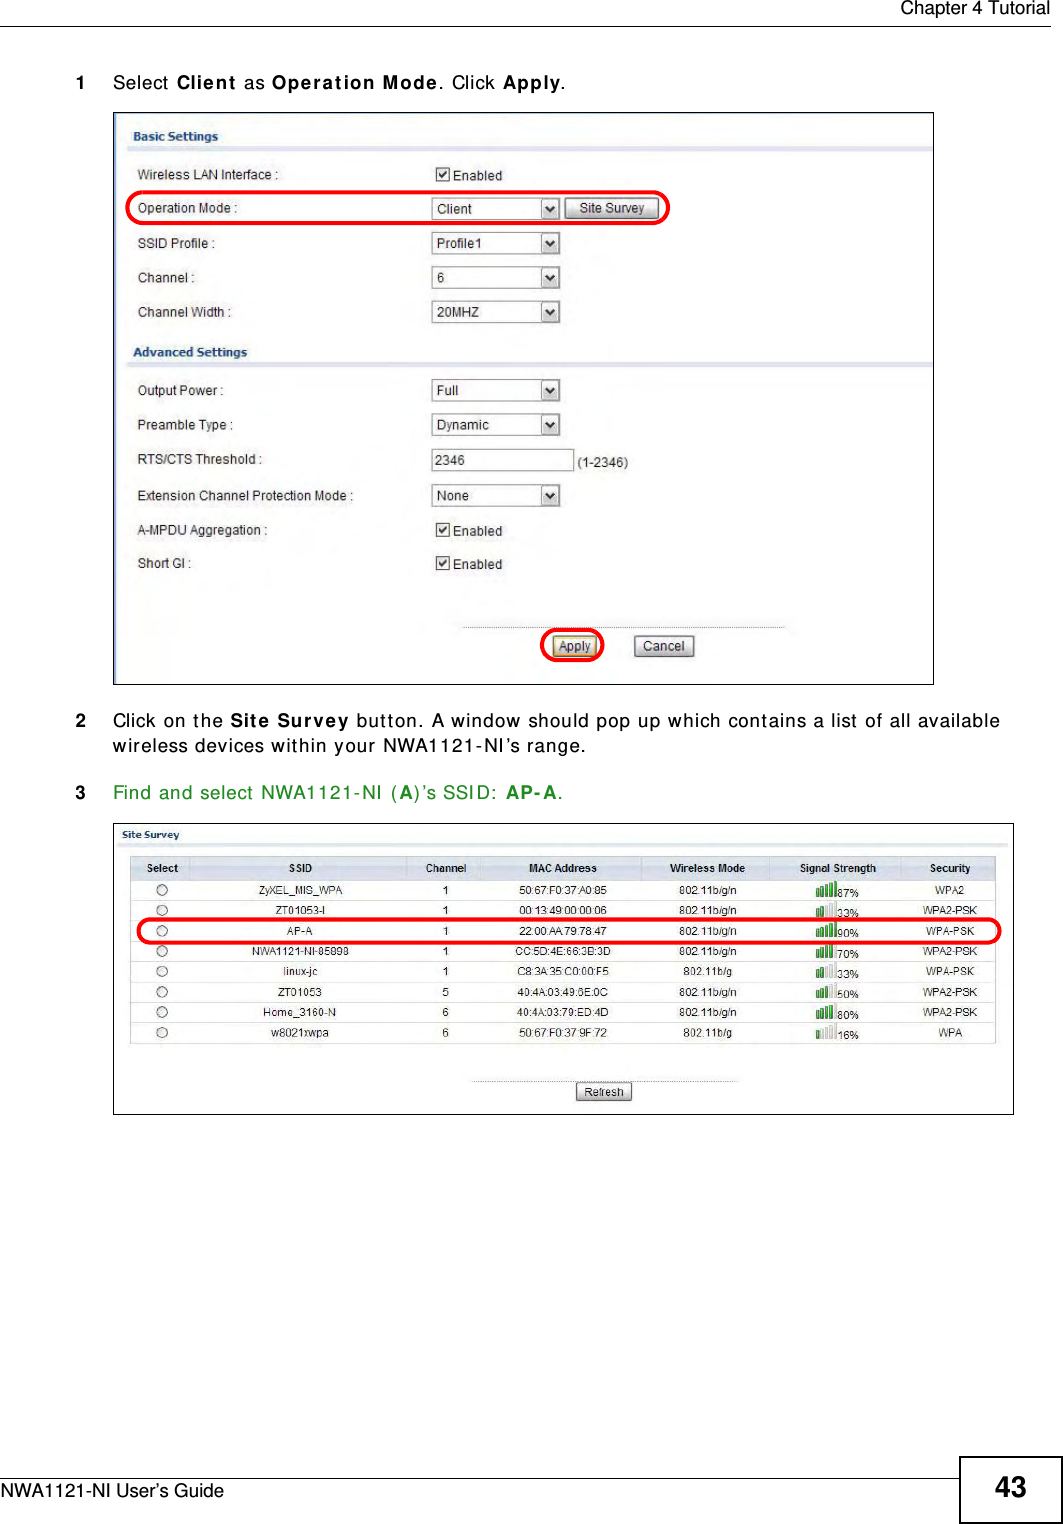  Chapter 4 TutorialNWA1121-NI User’s Guide 431Select Client as Operation Mode. Click Apply. 2Click on the Site Survey button. A window should pop up which contains a list of all available wireless devices within your NWA1121-NI’s range.3Find and select NWA1121-NI (A)’s SSID: AP-A.